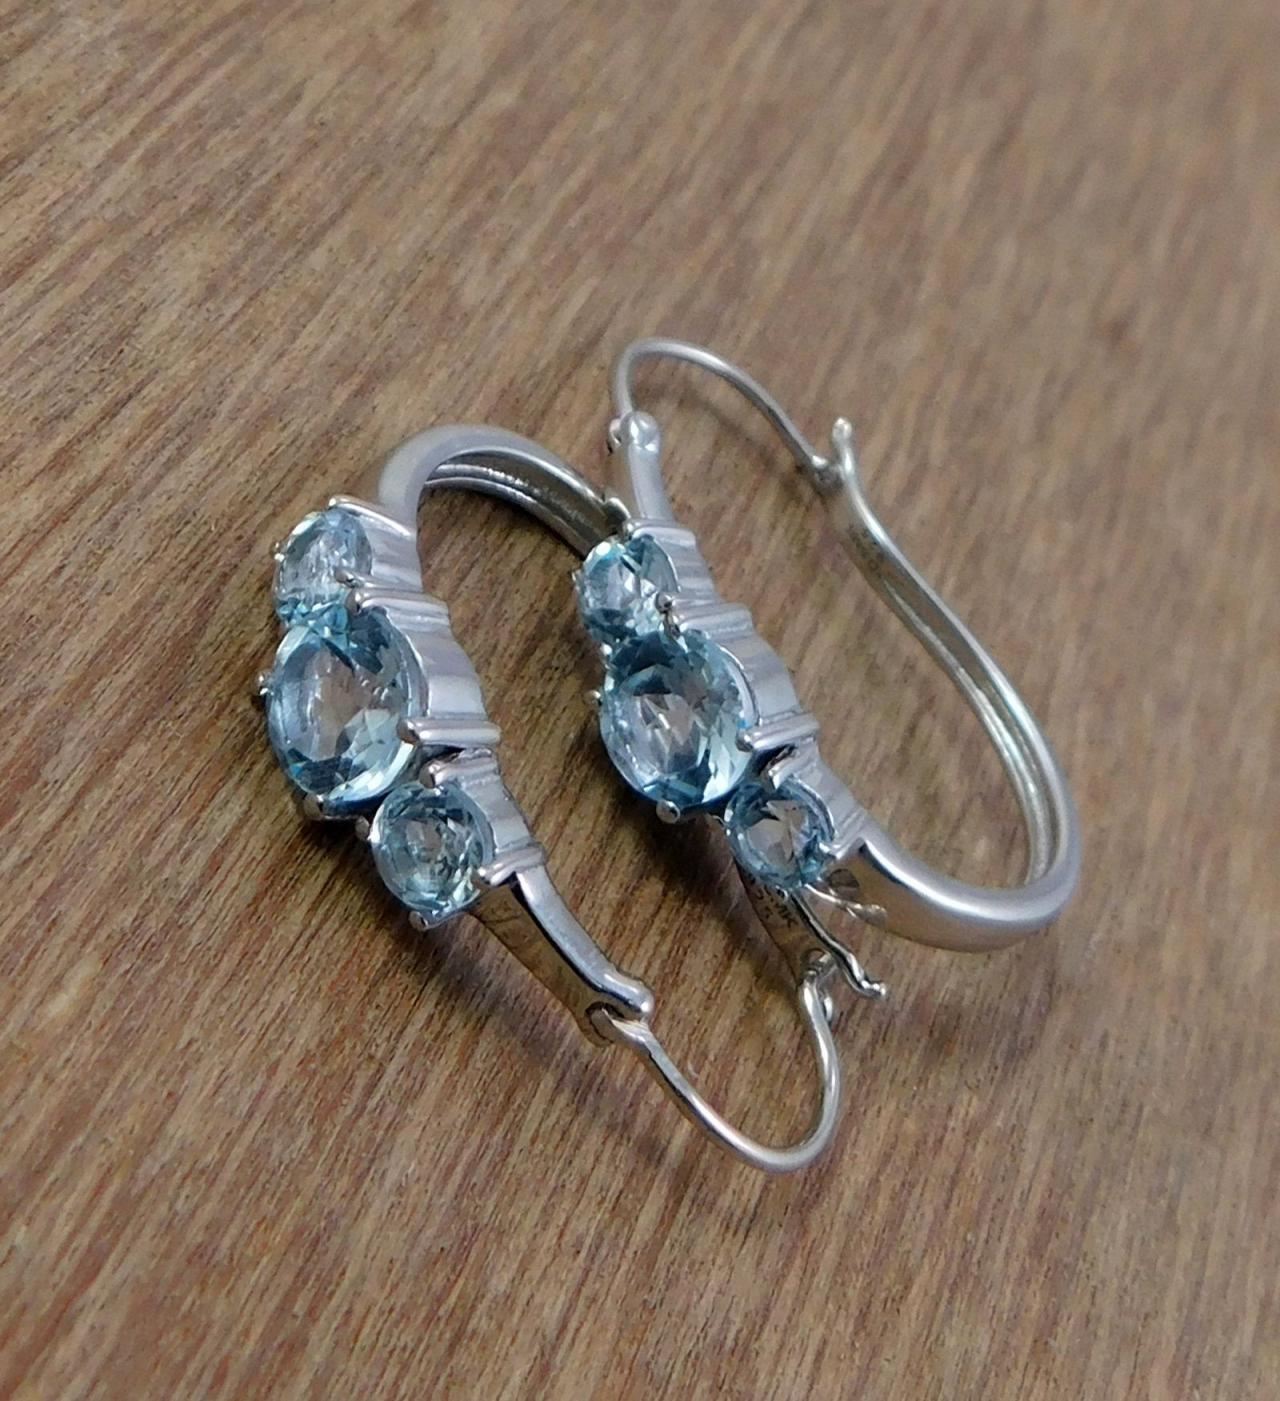 Magnificent Blue Topaz Hoop Earrings For Girl Friend,925 Sterling Silver Jewelry,daughter's Birthday Gift,anniversary Present,garnet